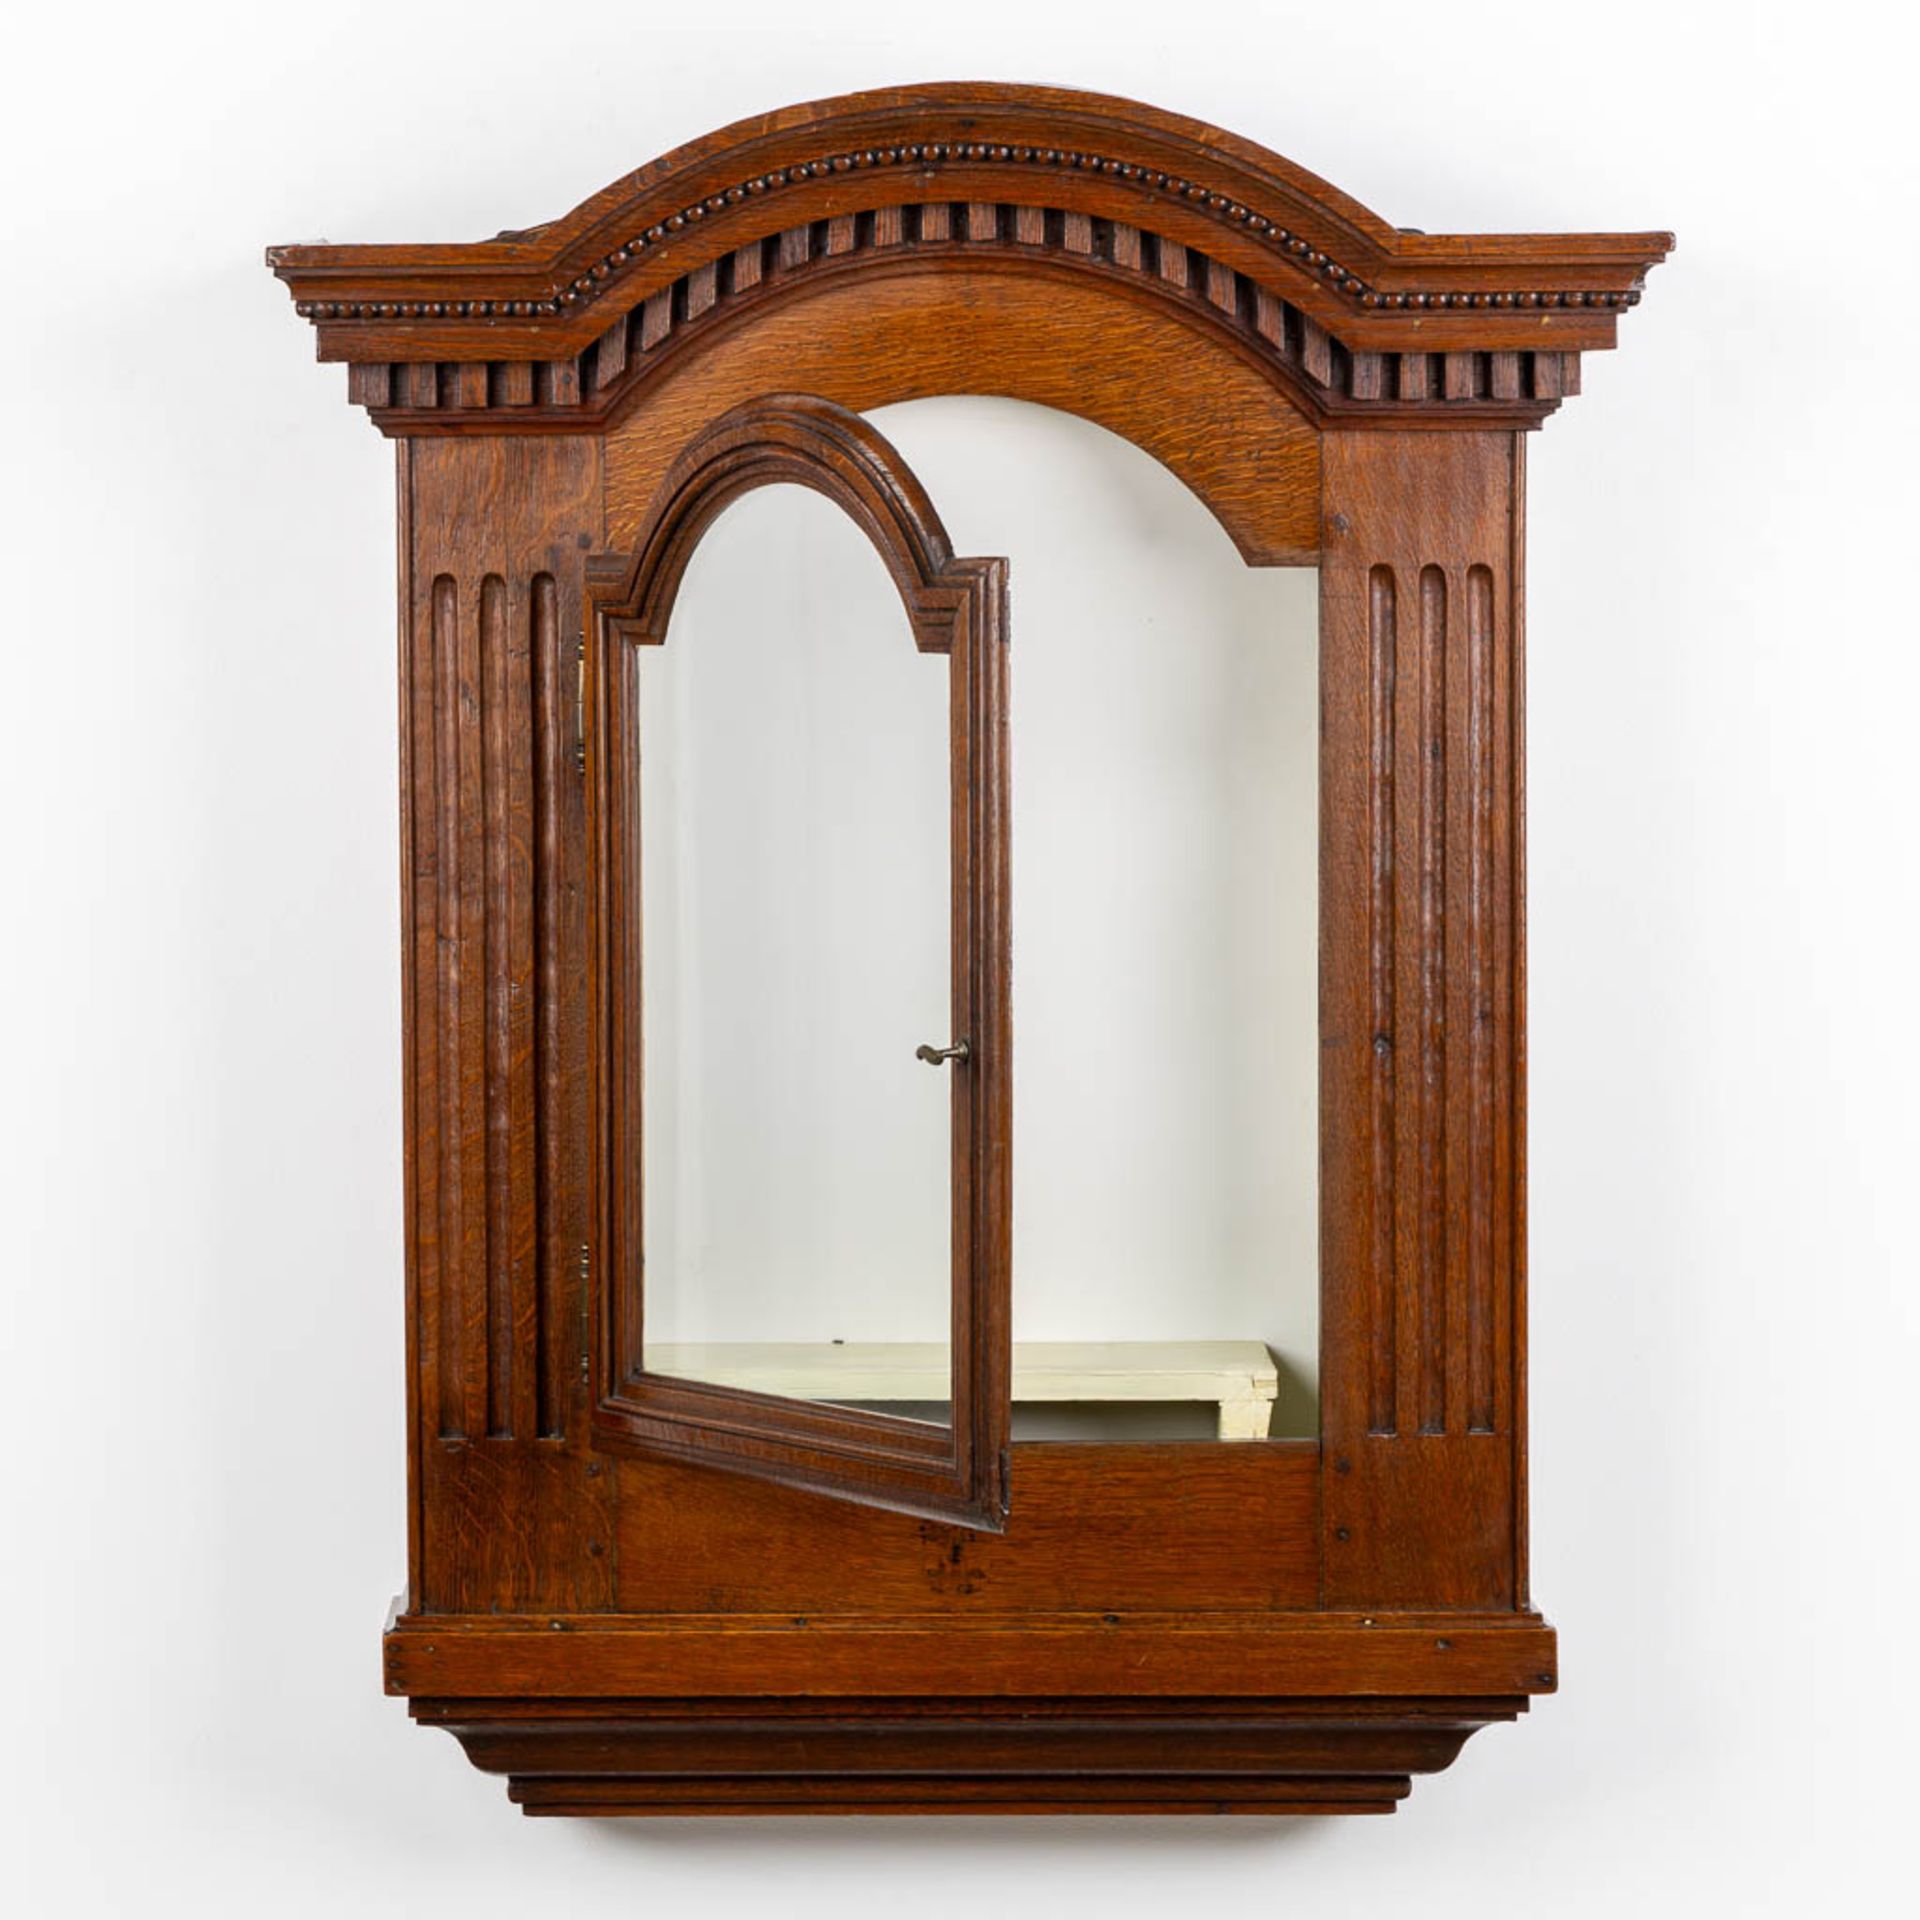 A small wall-mounted display cabinet, Oak, 19th C. (L:23 x W:75 x H:96 cm) - Image 3 of 8